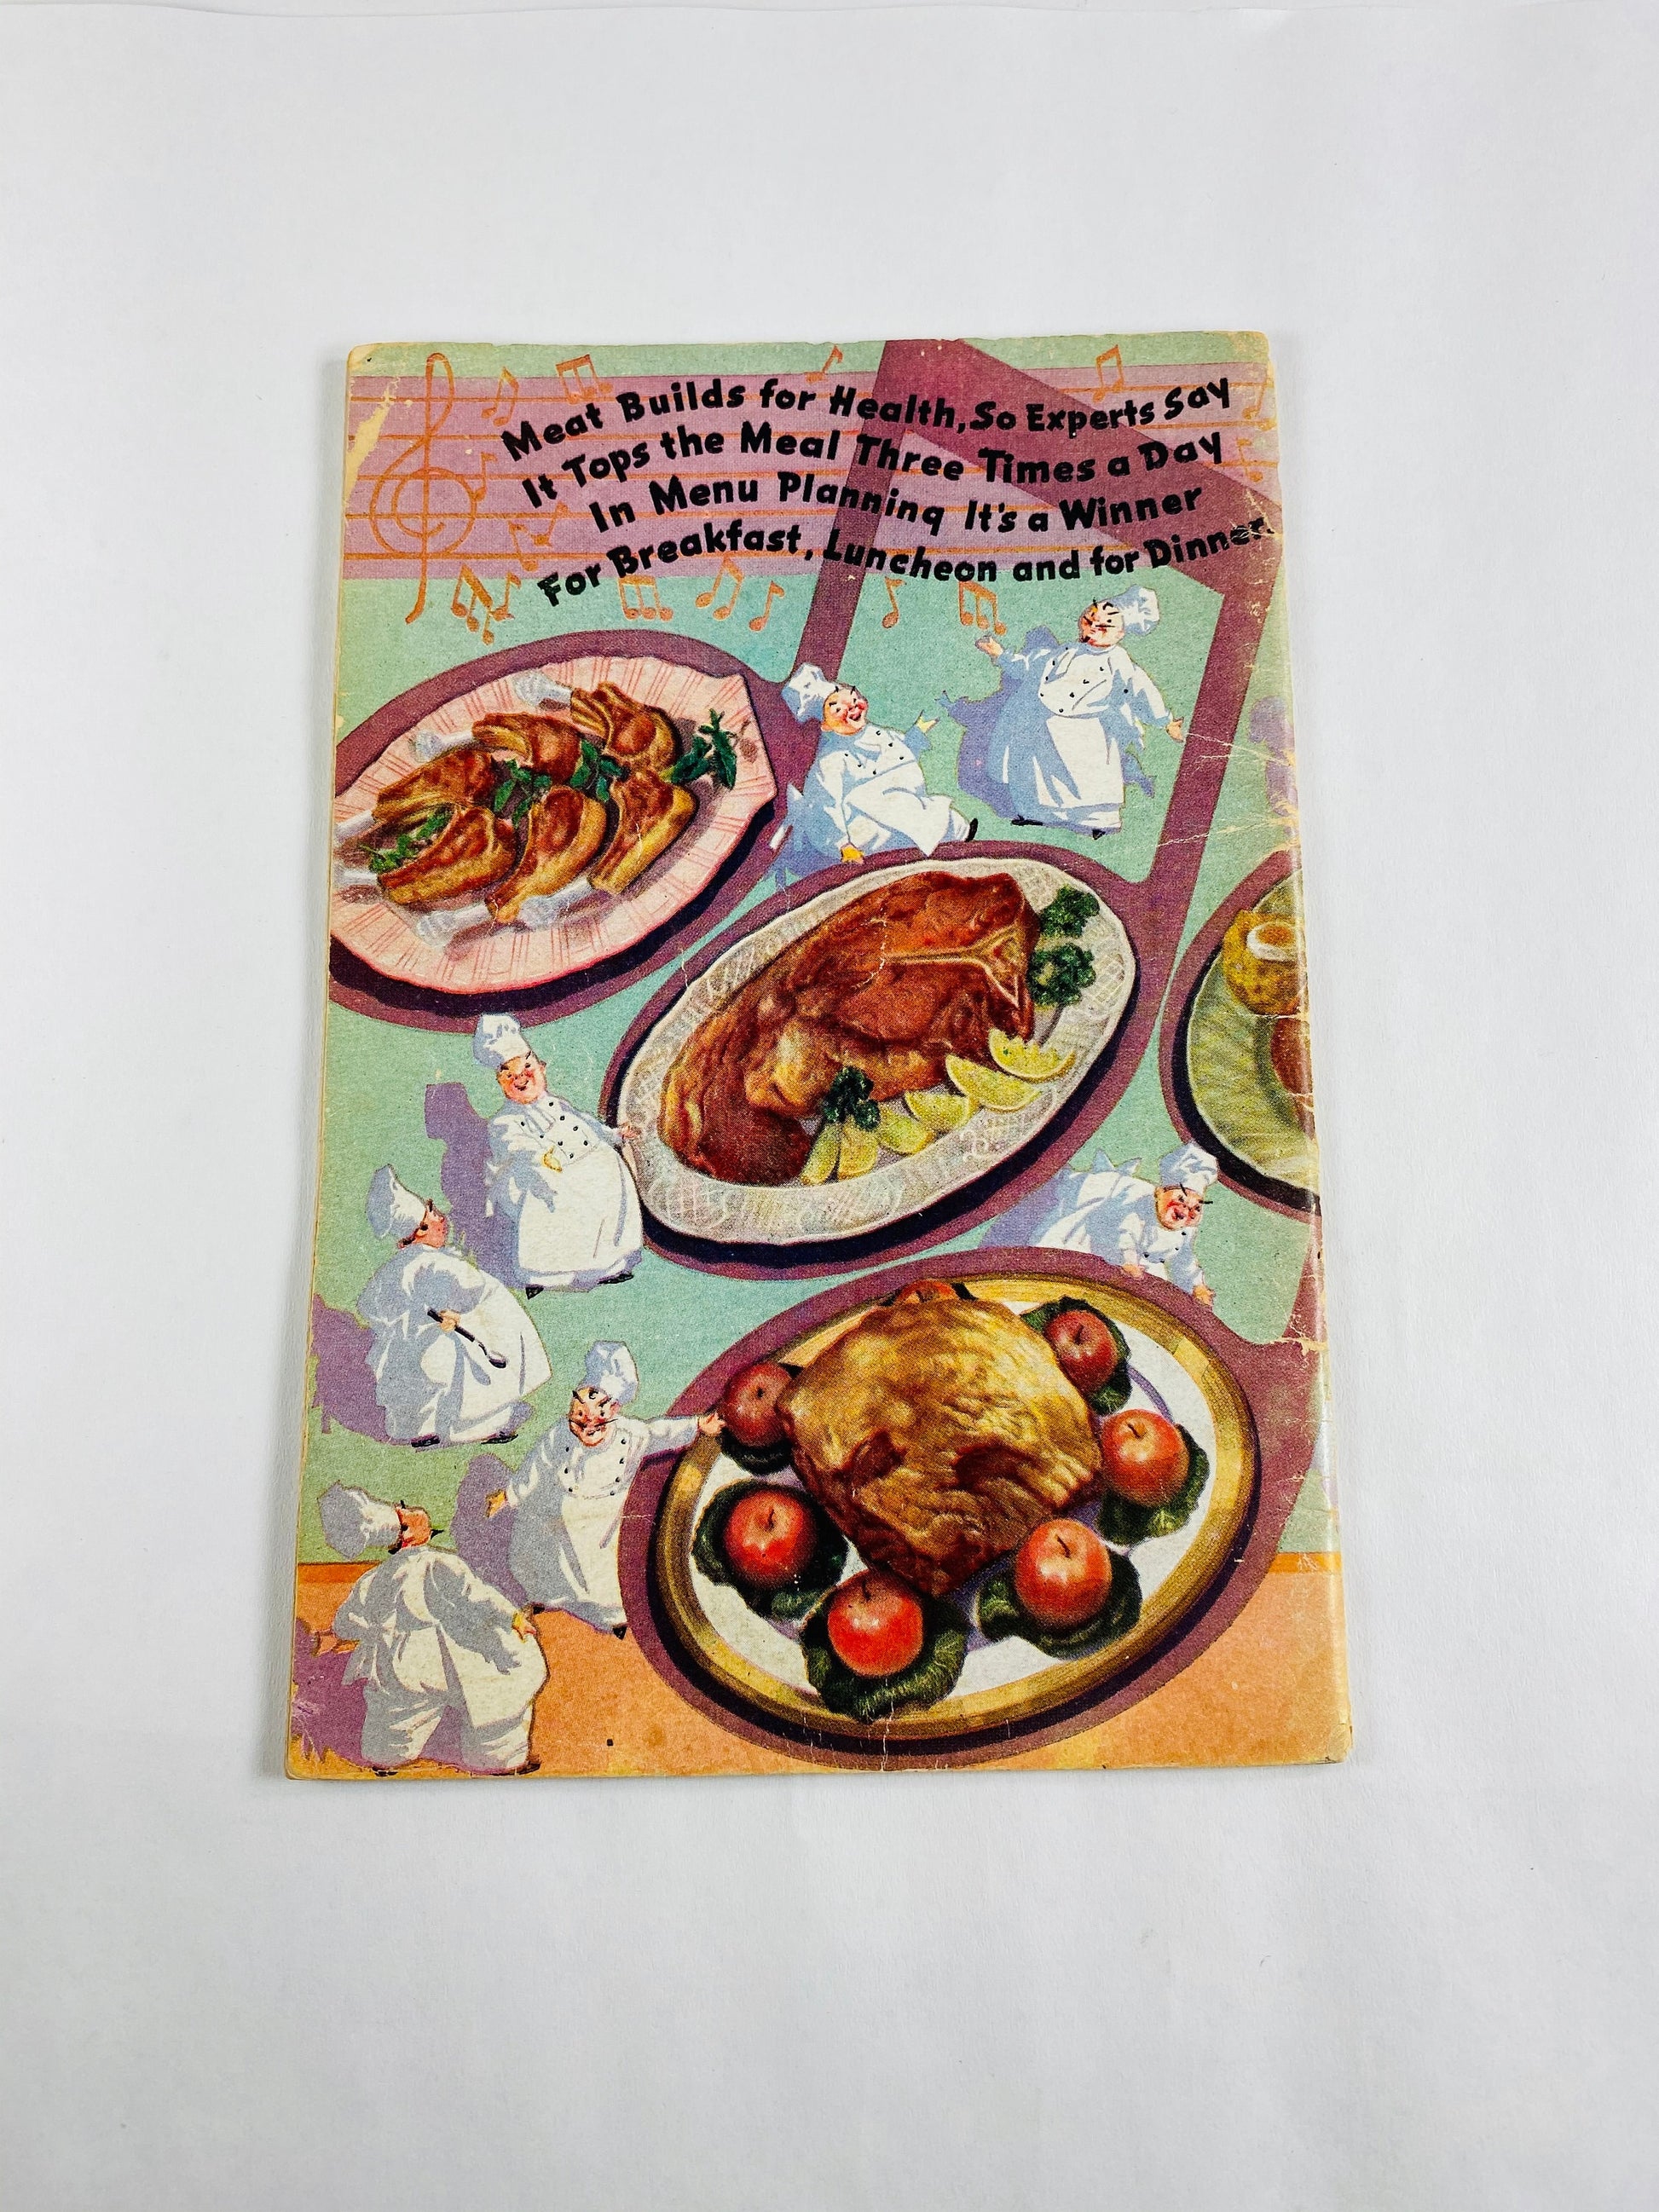 Medley of Meat Recipes WWII era vintage cookbook pamphlet printed by McWhorter Fine Meats. Guy Gift Bachelor.